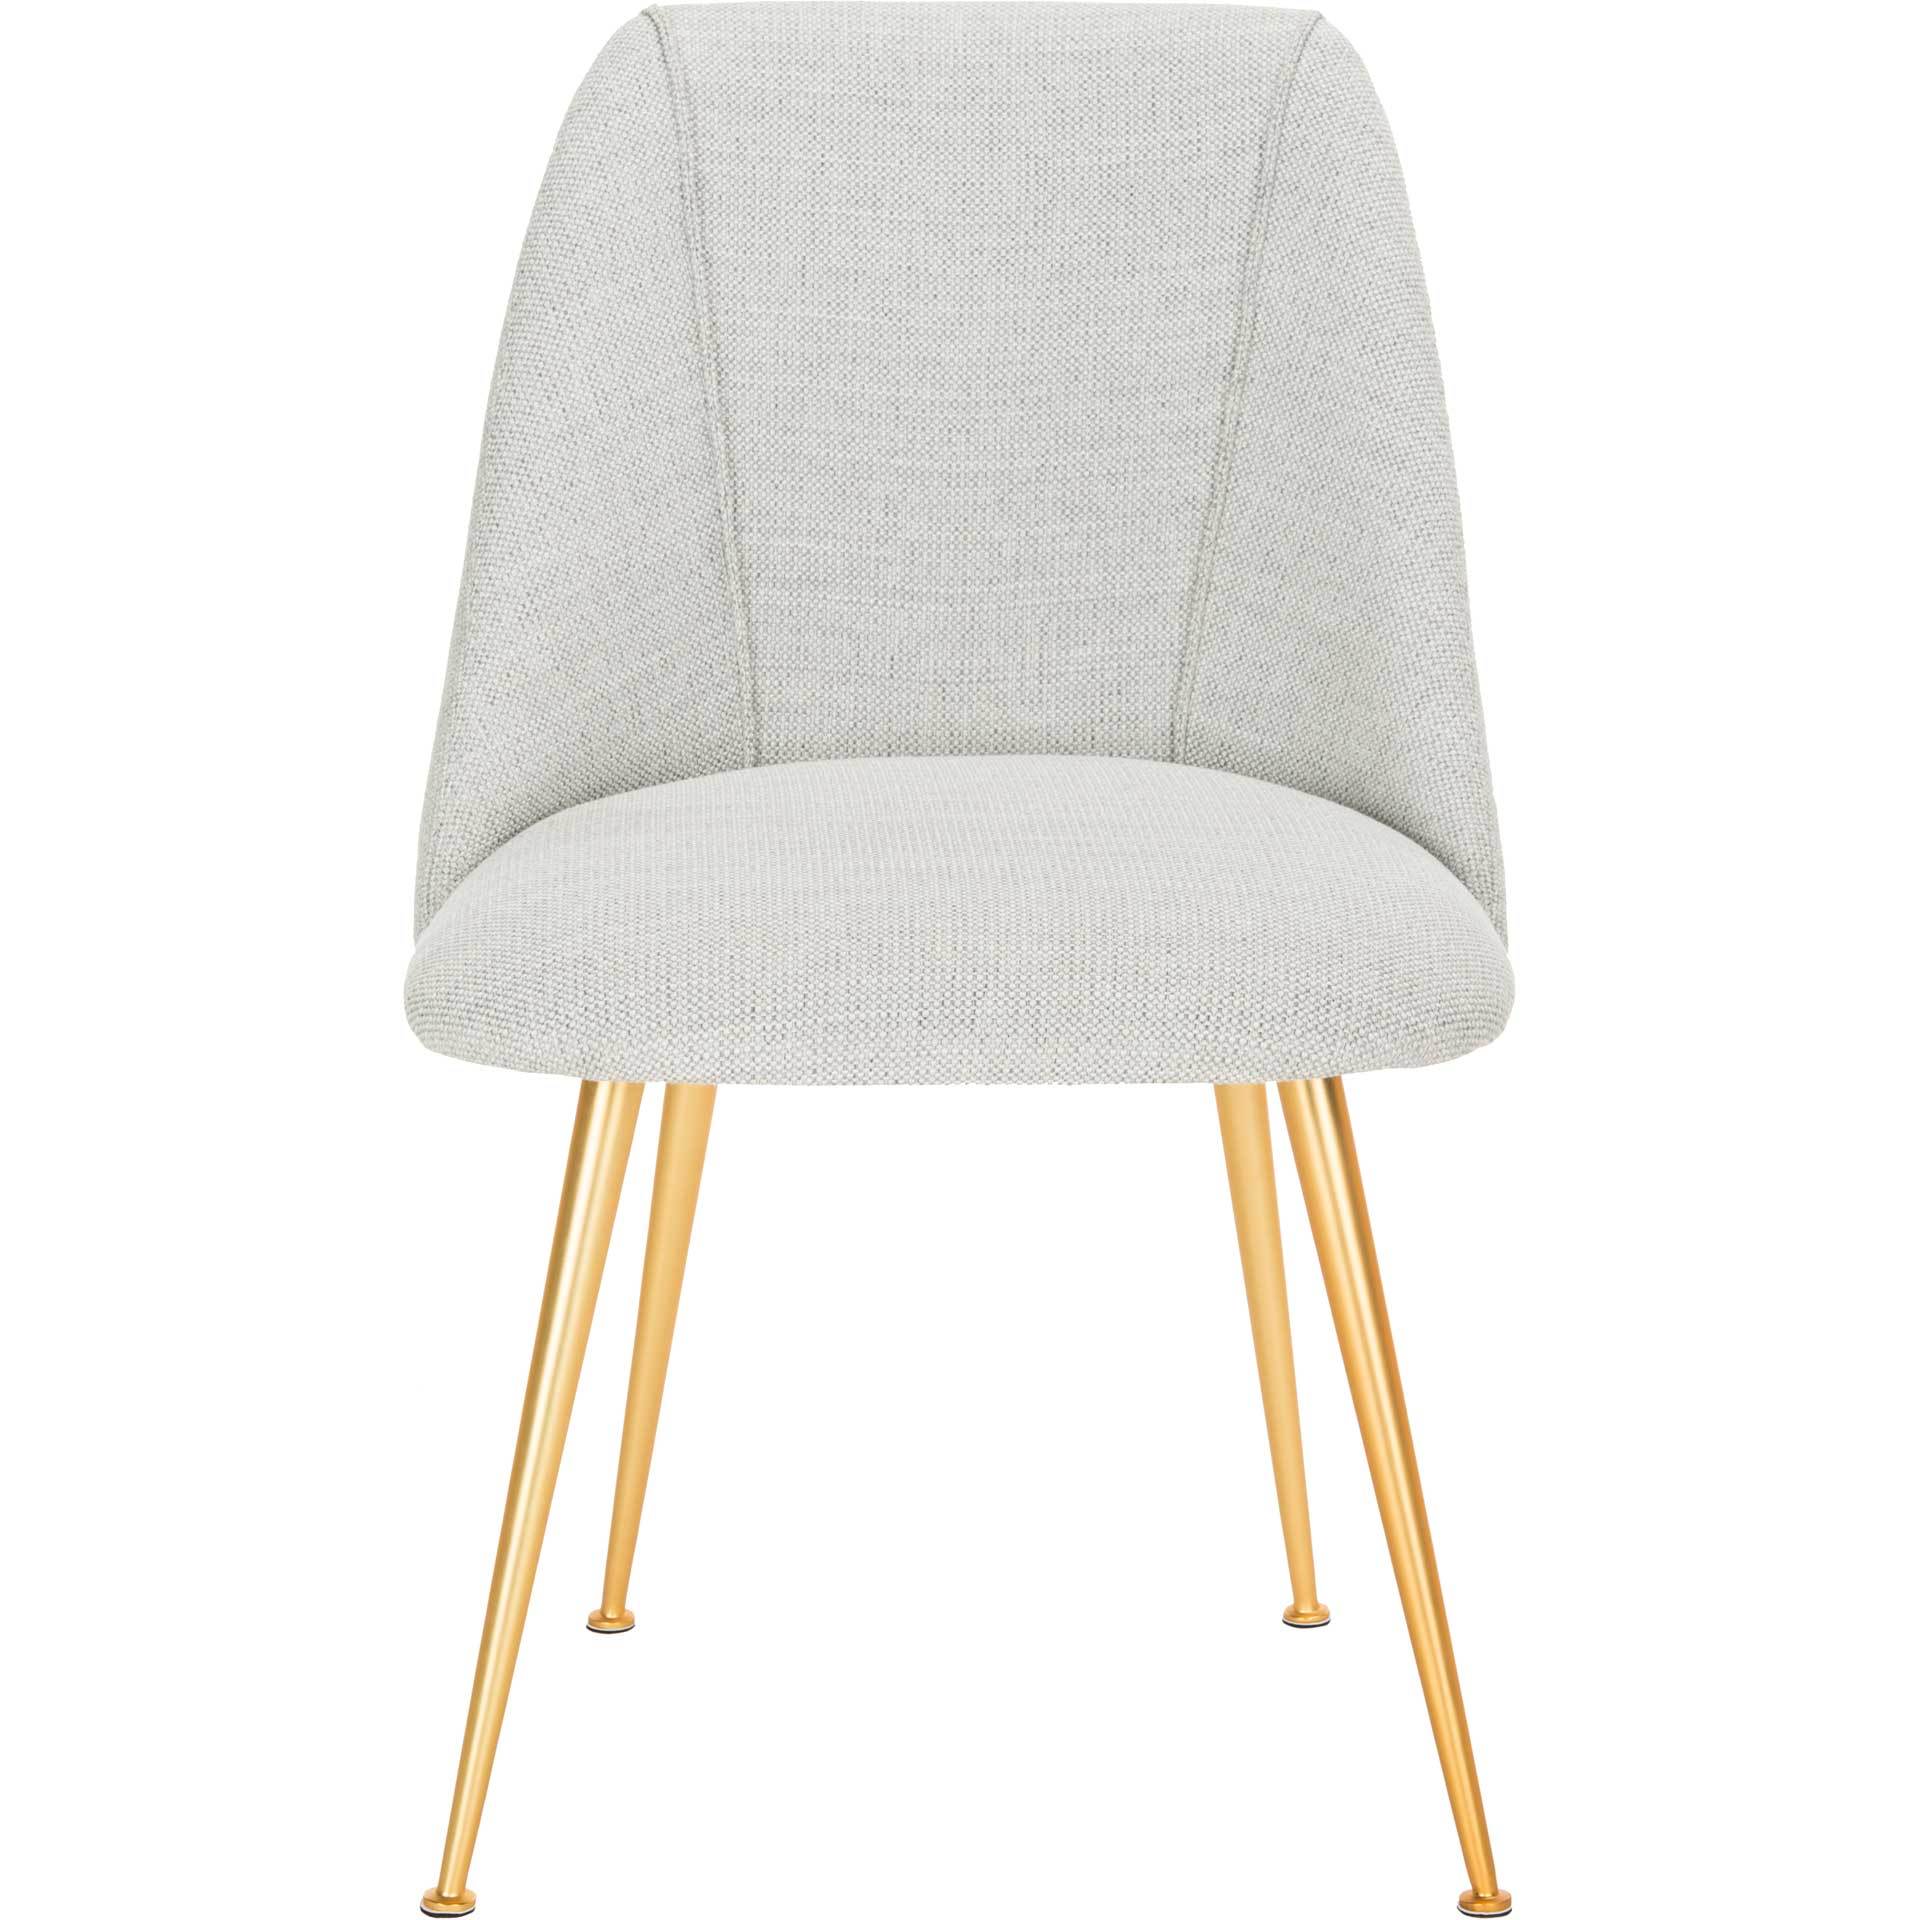 Forrest Side Chair Light Gray/Gold